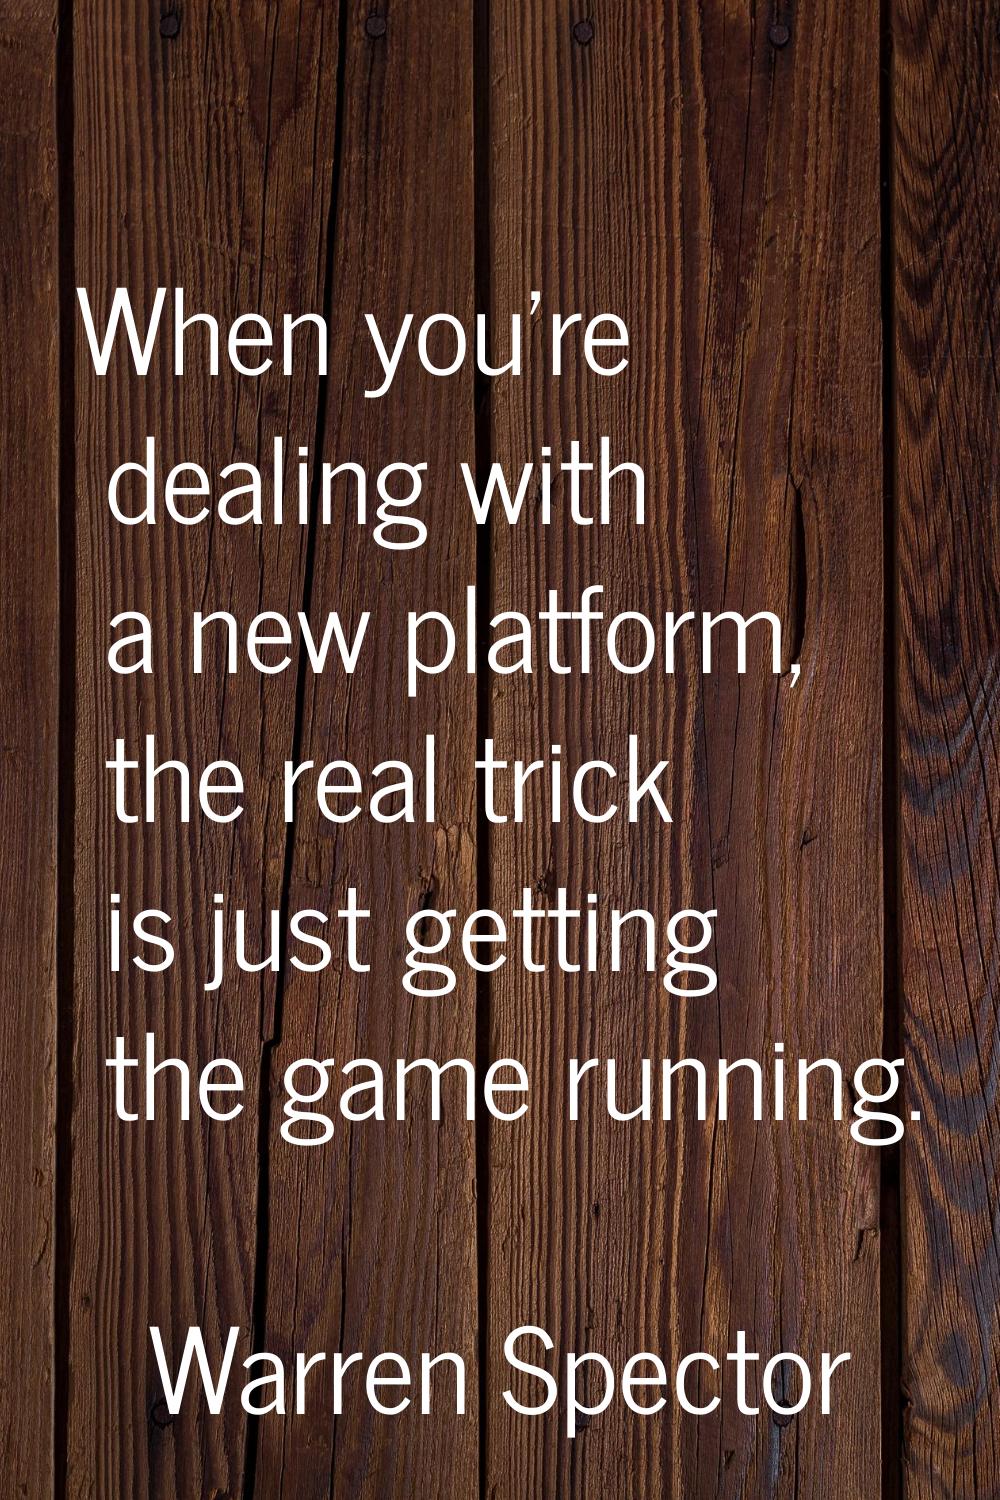 When you're dealing with a new platform, the real trick is just getting the game running.